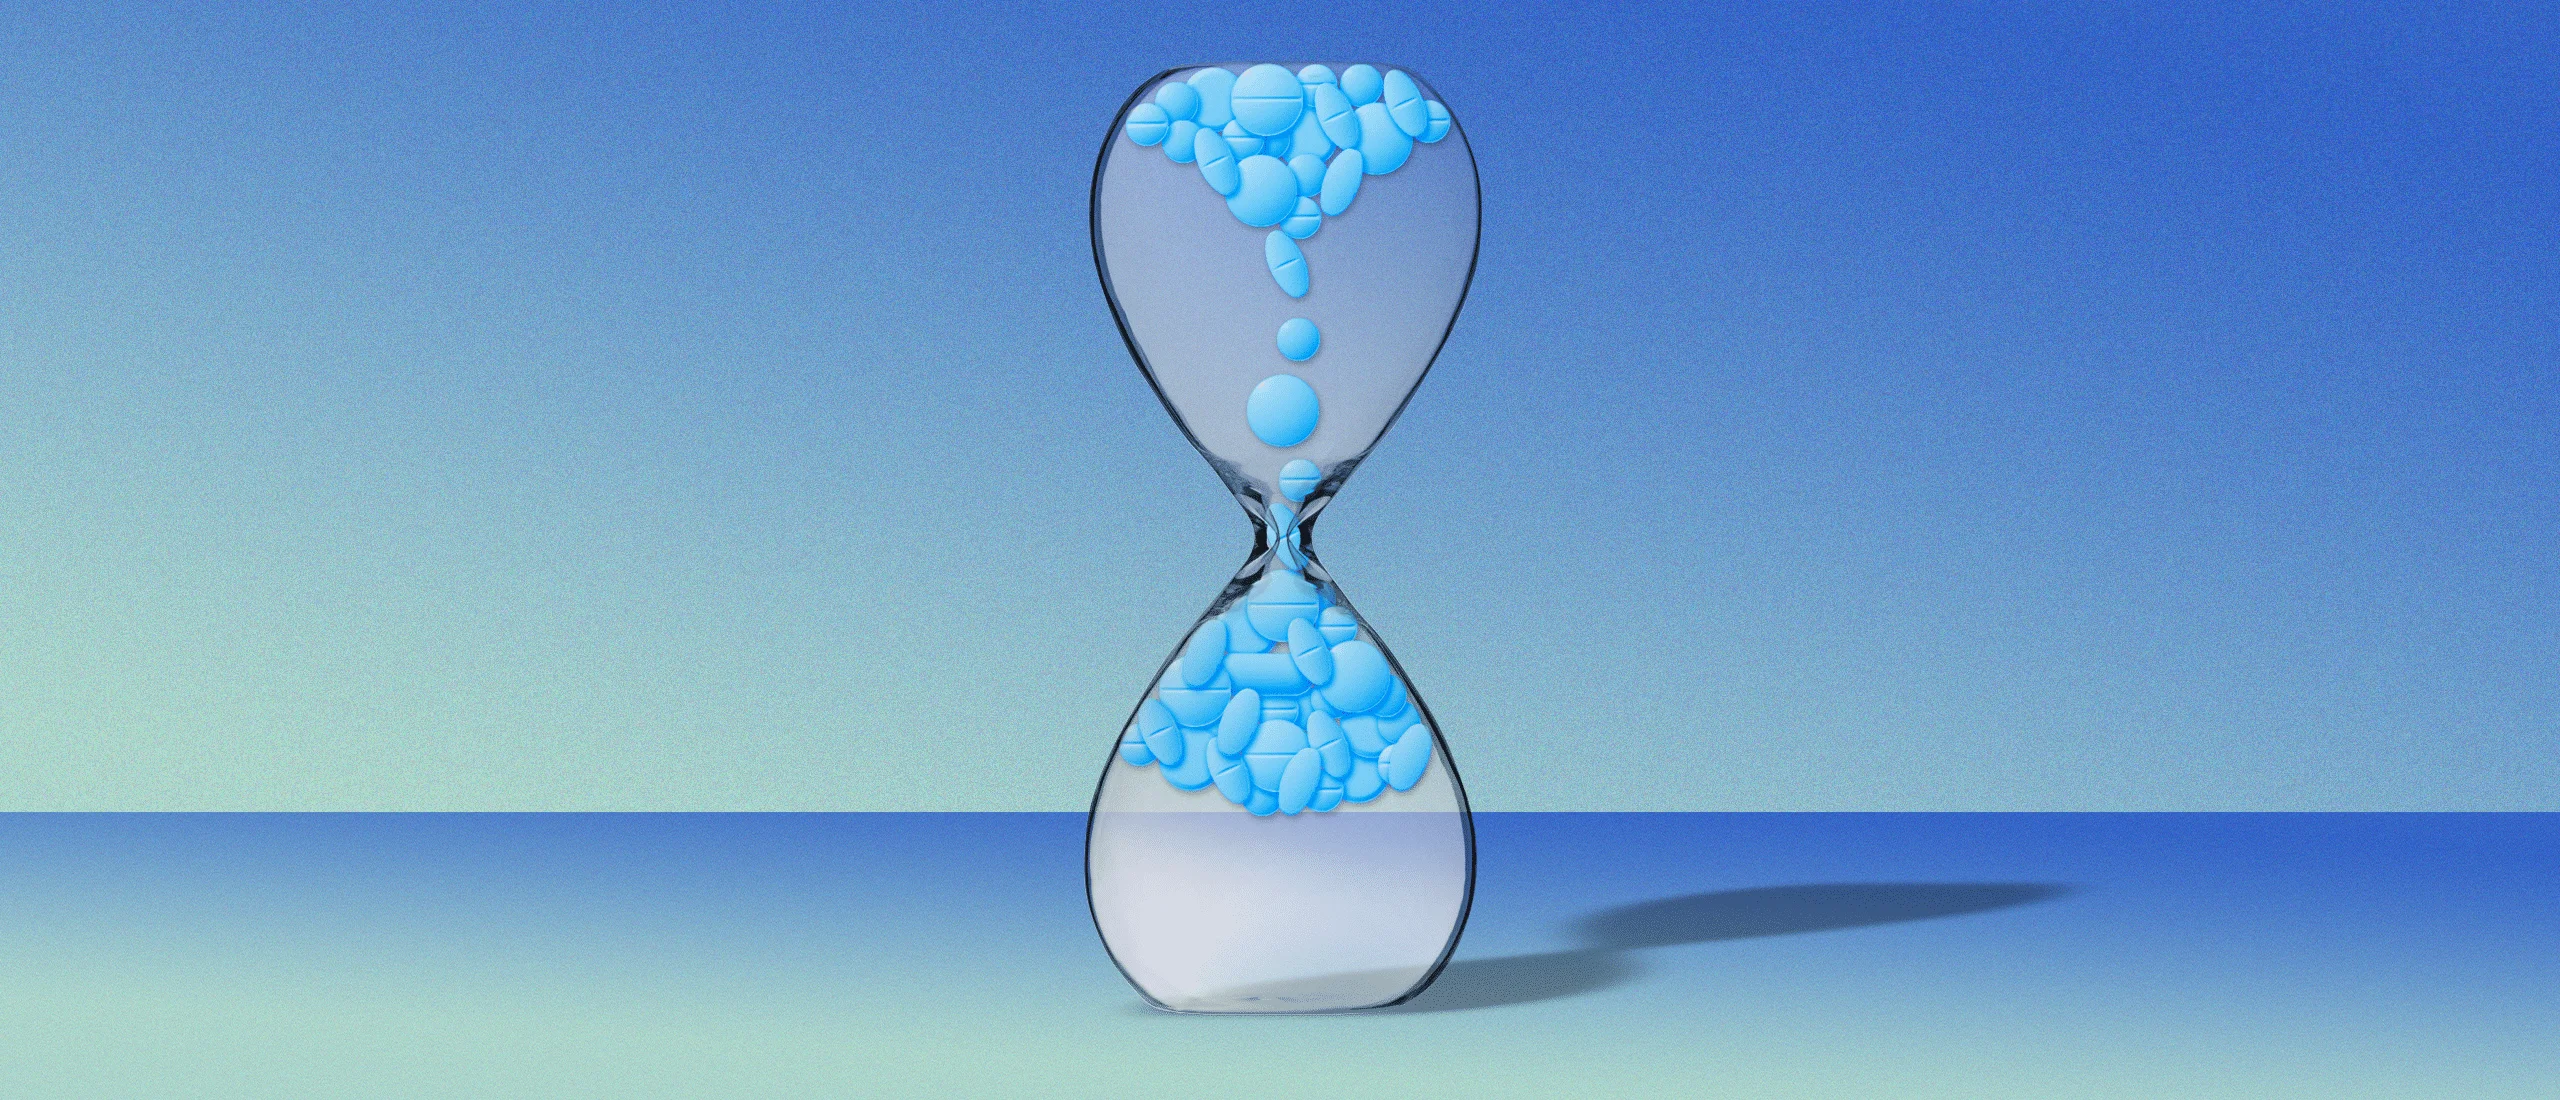 Pills falling upwards in an hourglass on blue background